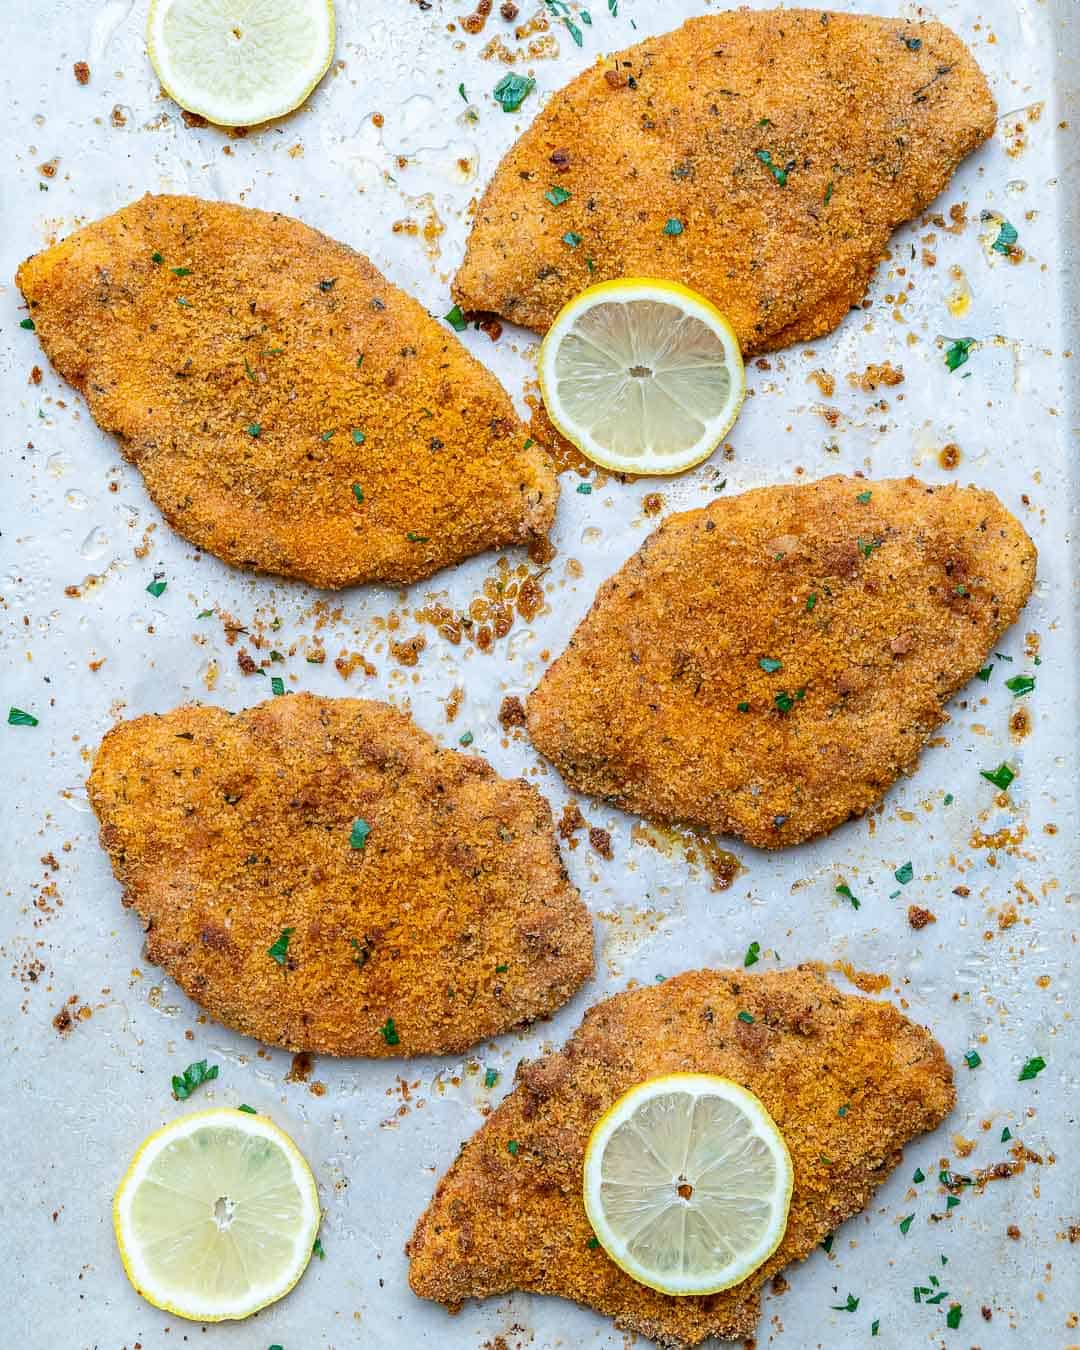 Crispy Oven Baked Chicken Cutlets Recipe | Healthy Fitness Meals